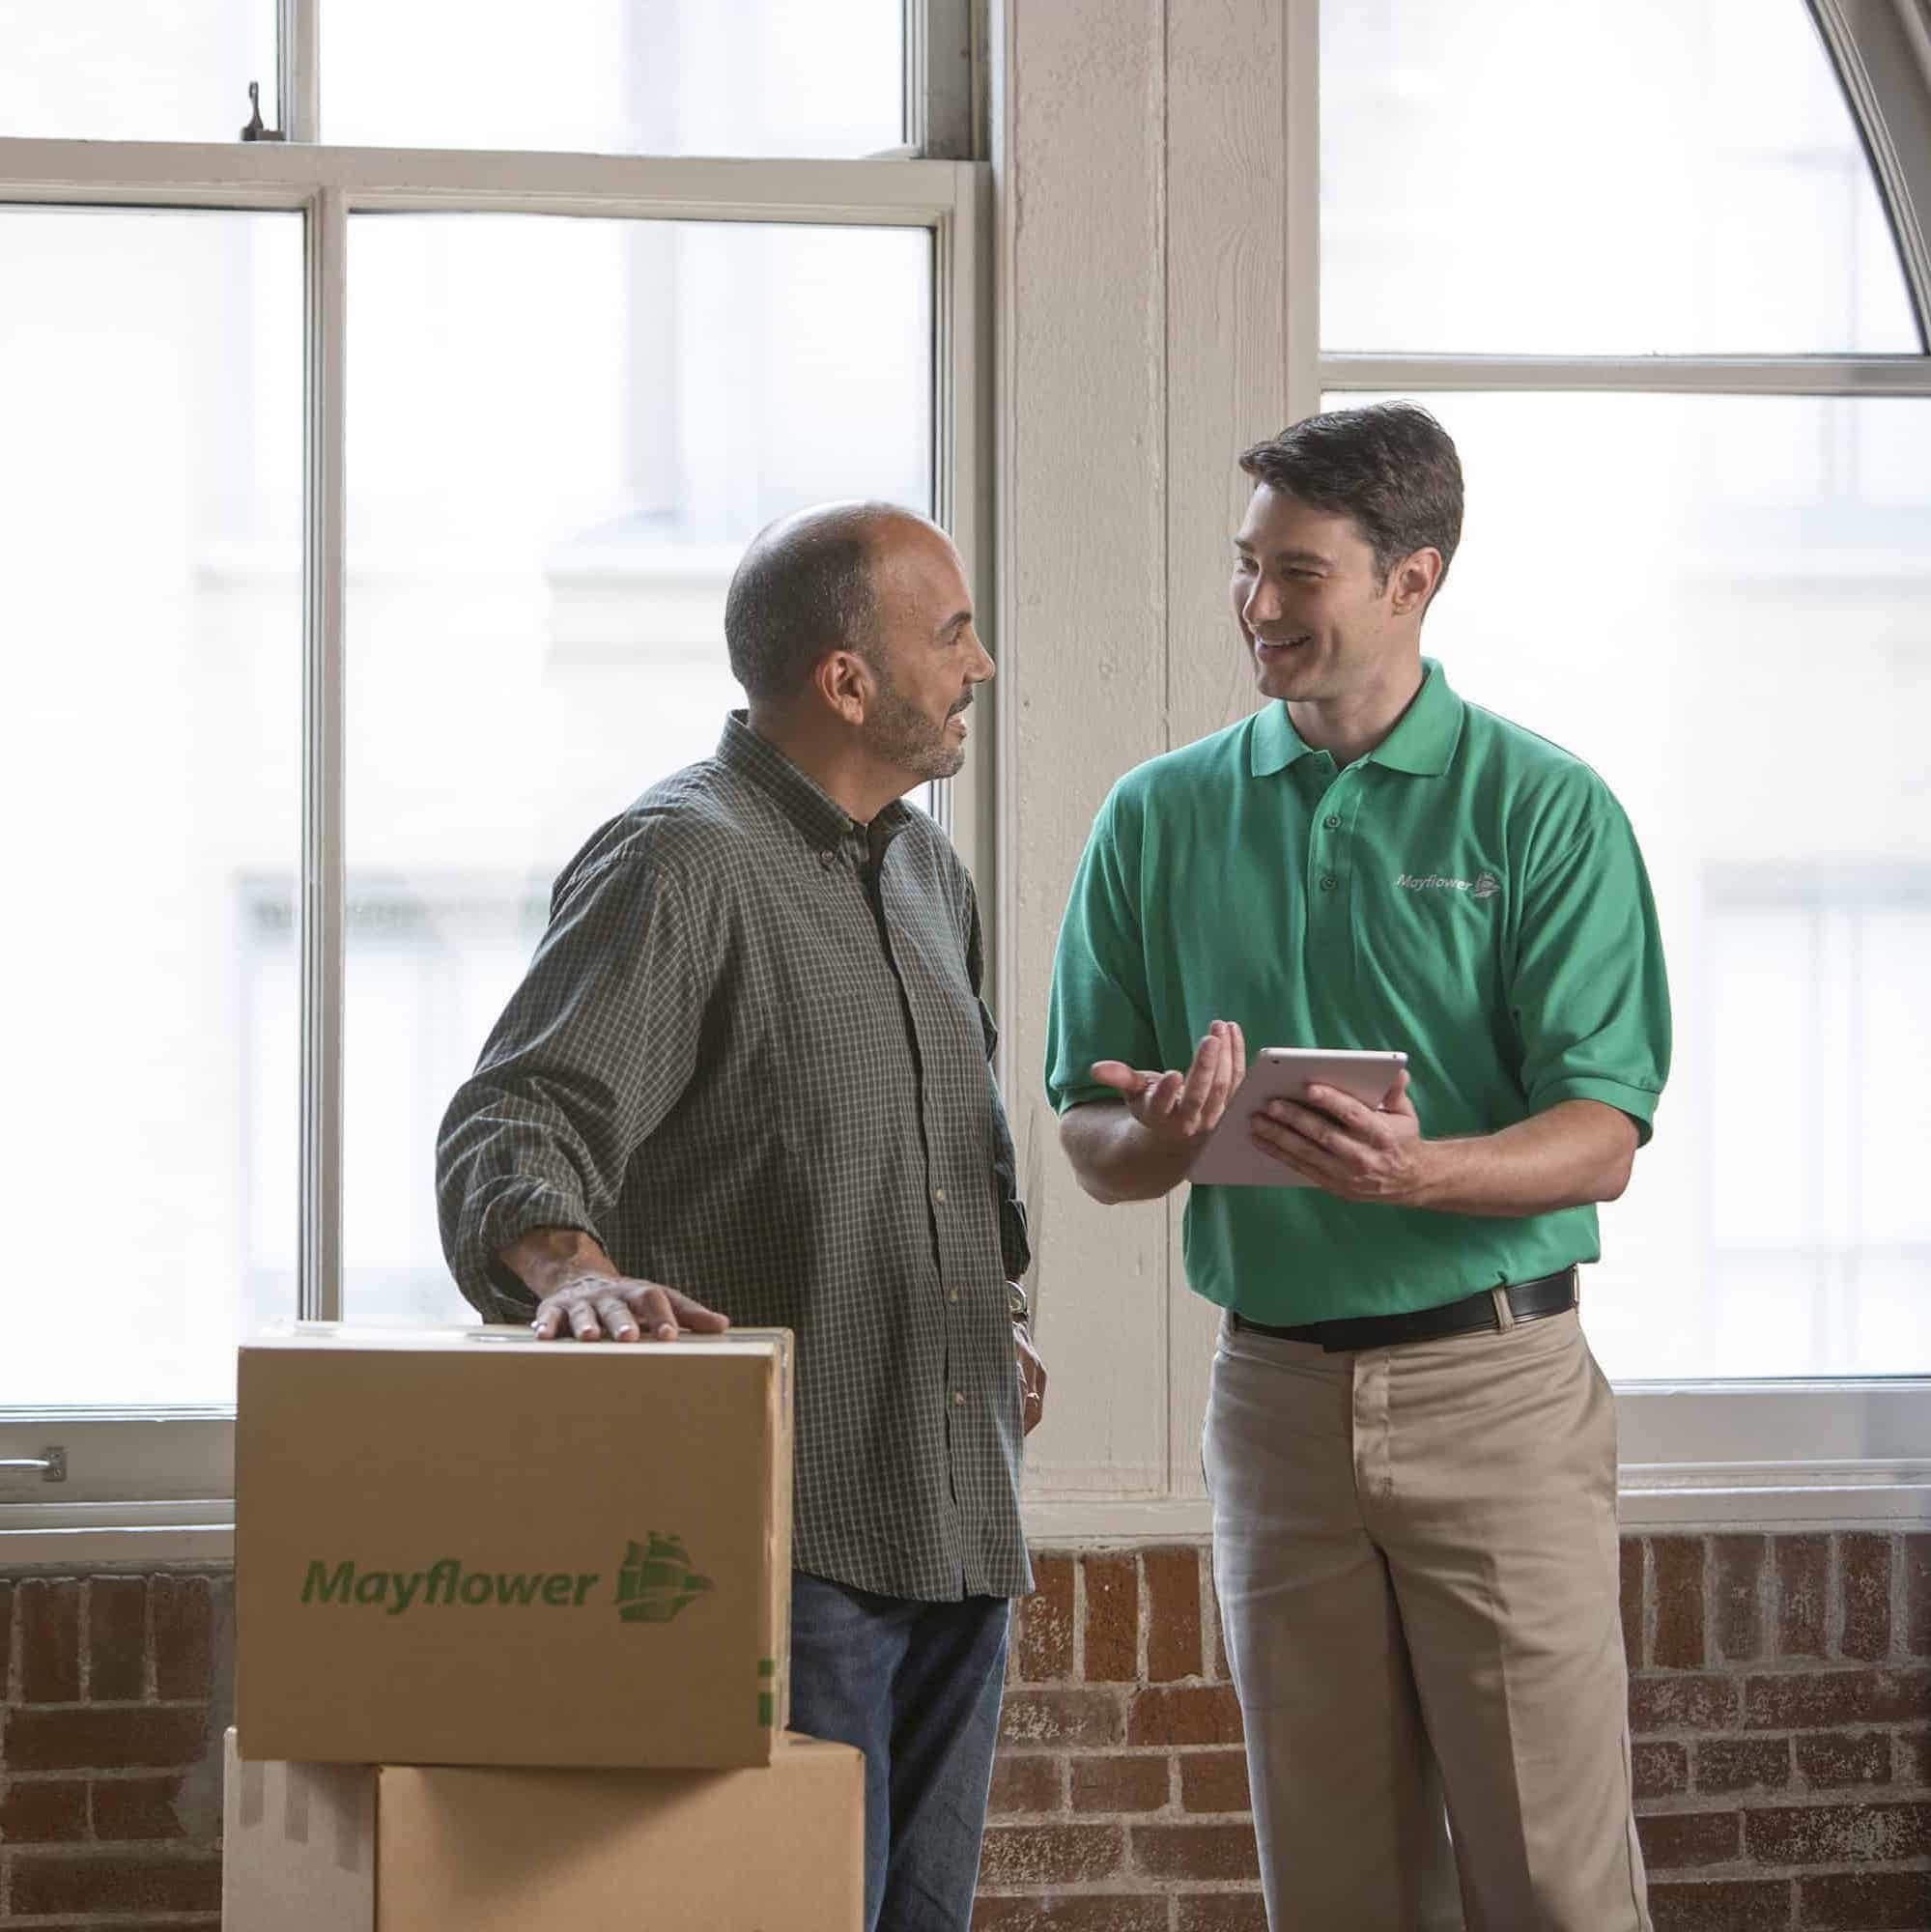 mayflower mover working with customer in his home in front of moving boxes - Mayflower®